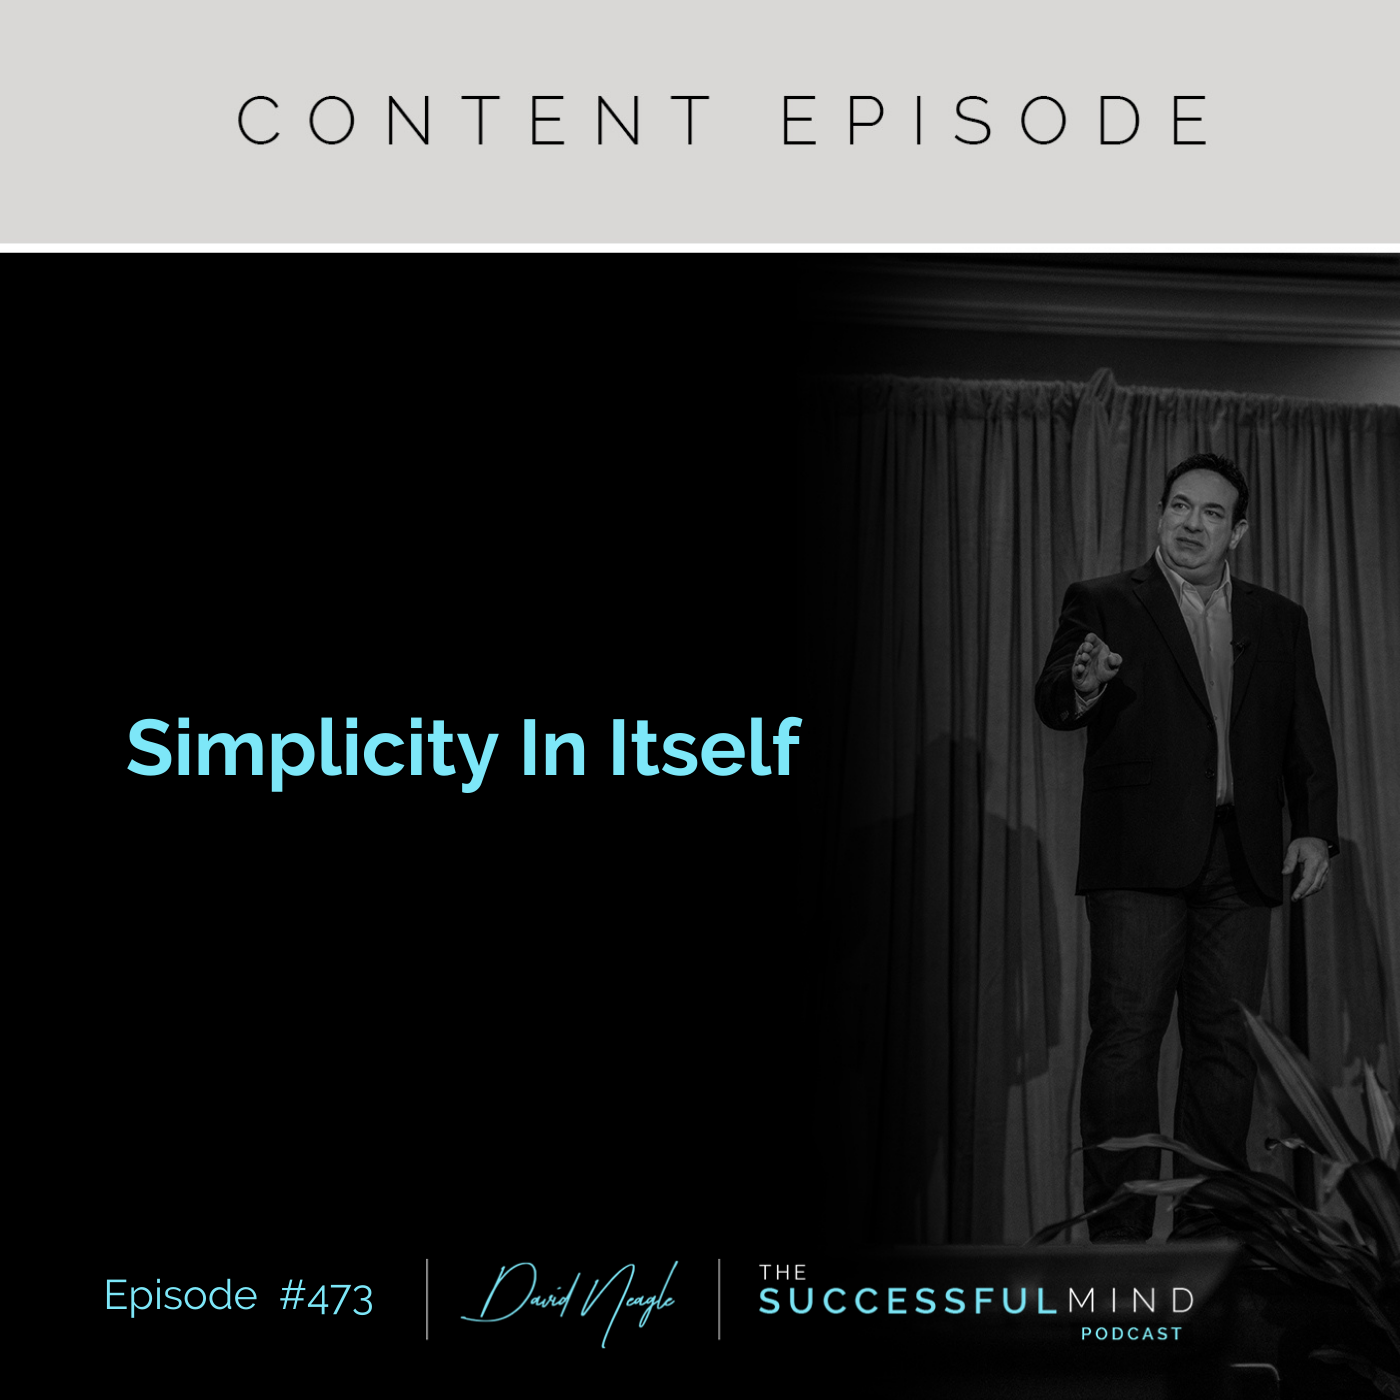 The Successful Mind Podcast – Episode 473 – Simplicity In Itself